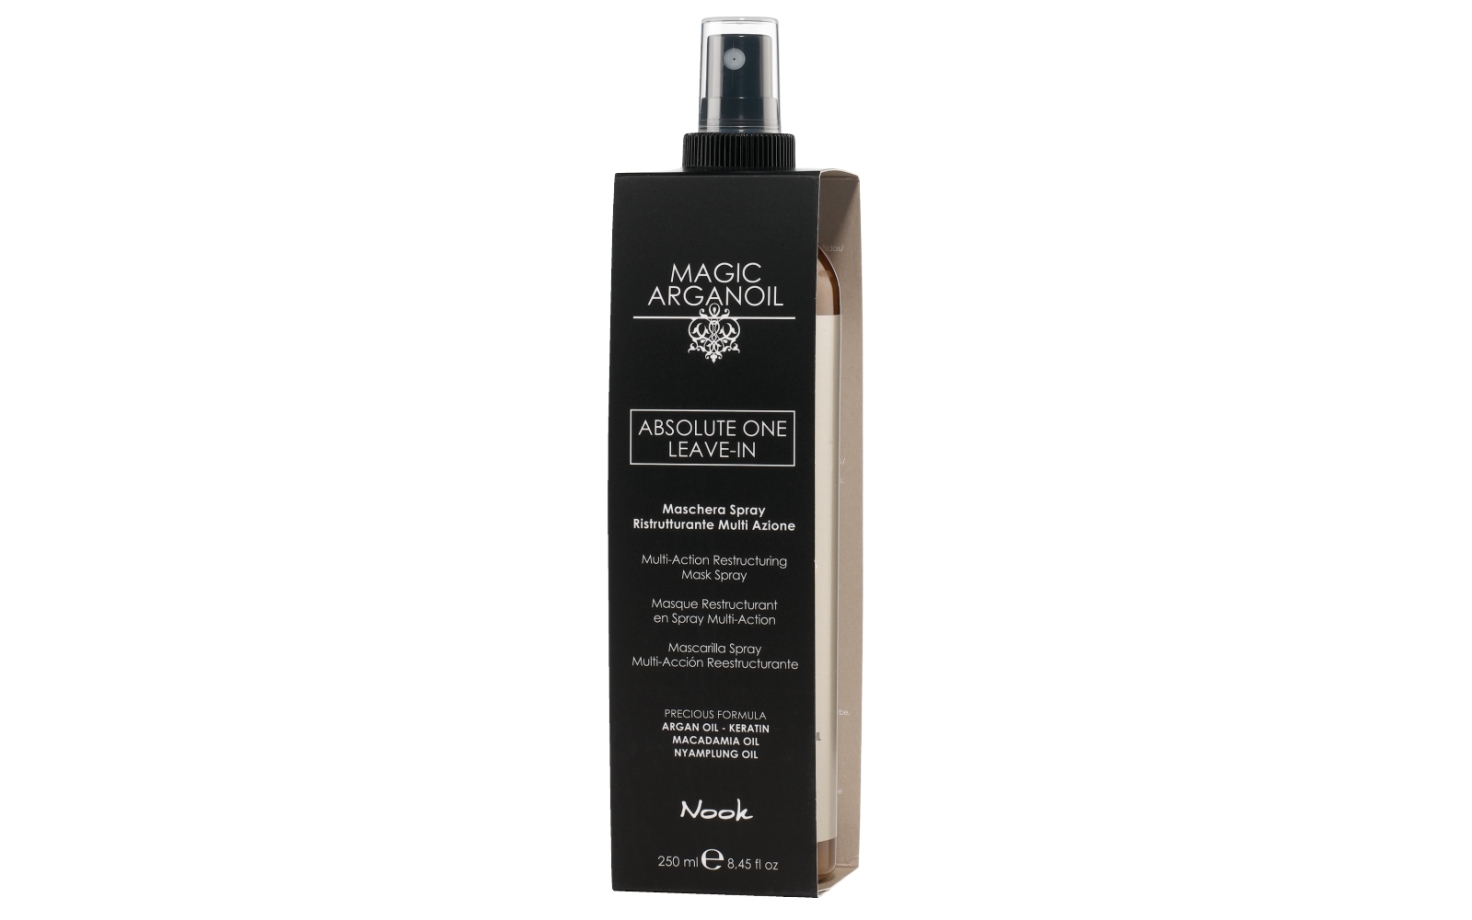 Nook Magic Arganoil Absolute One Leave-in Spray